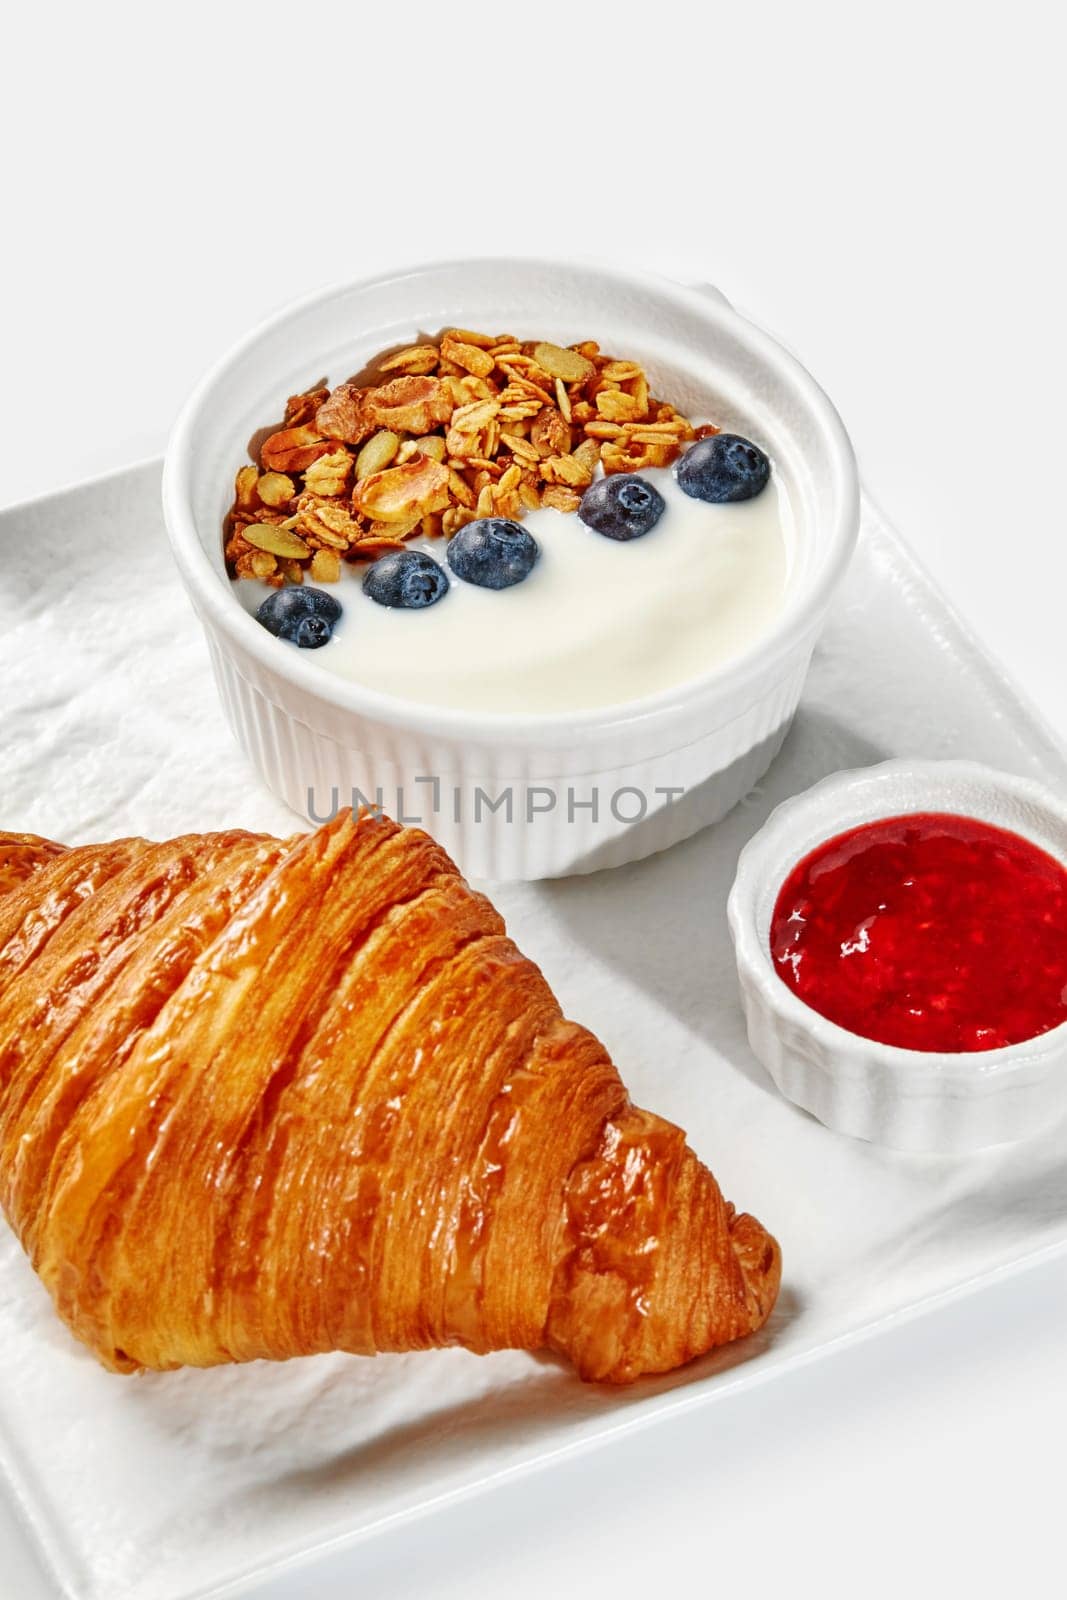 Delicious continental breakfast setup featuring buttery croissant, yogurt topped with granola and blueberries, and side of red berry jam served on white tray